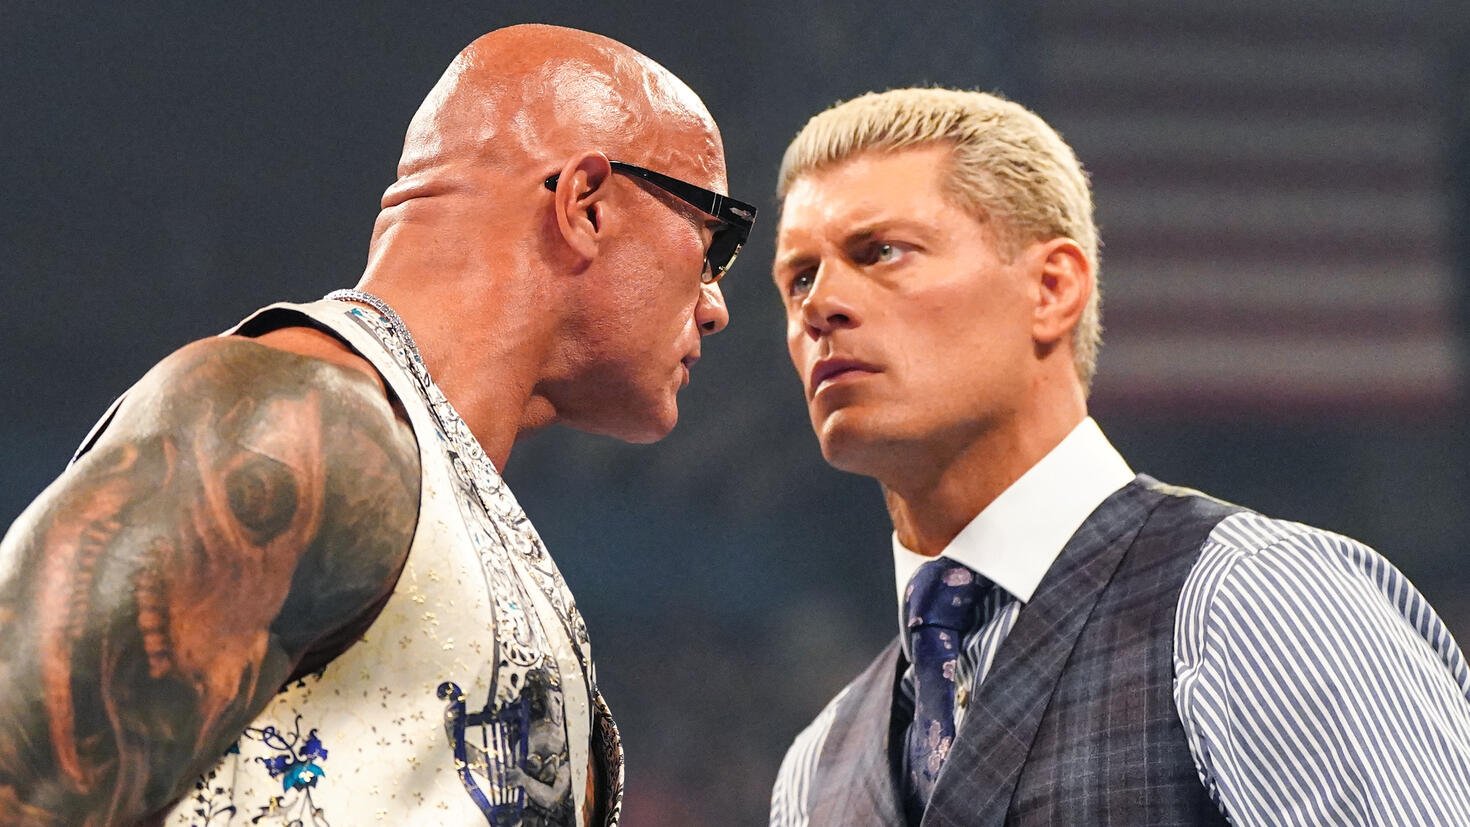 Cody Rhodes Recounts the Moment The Rock Acknowledged Him as “A Player”